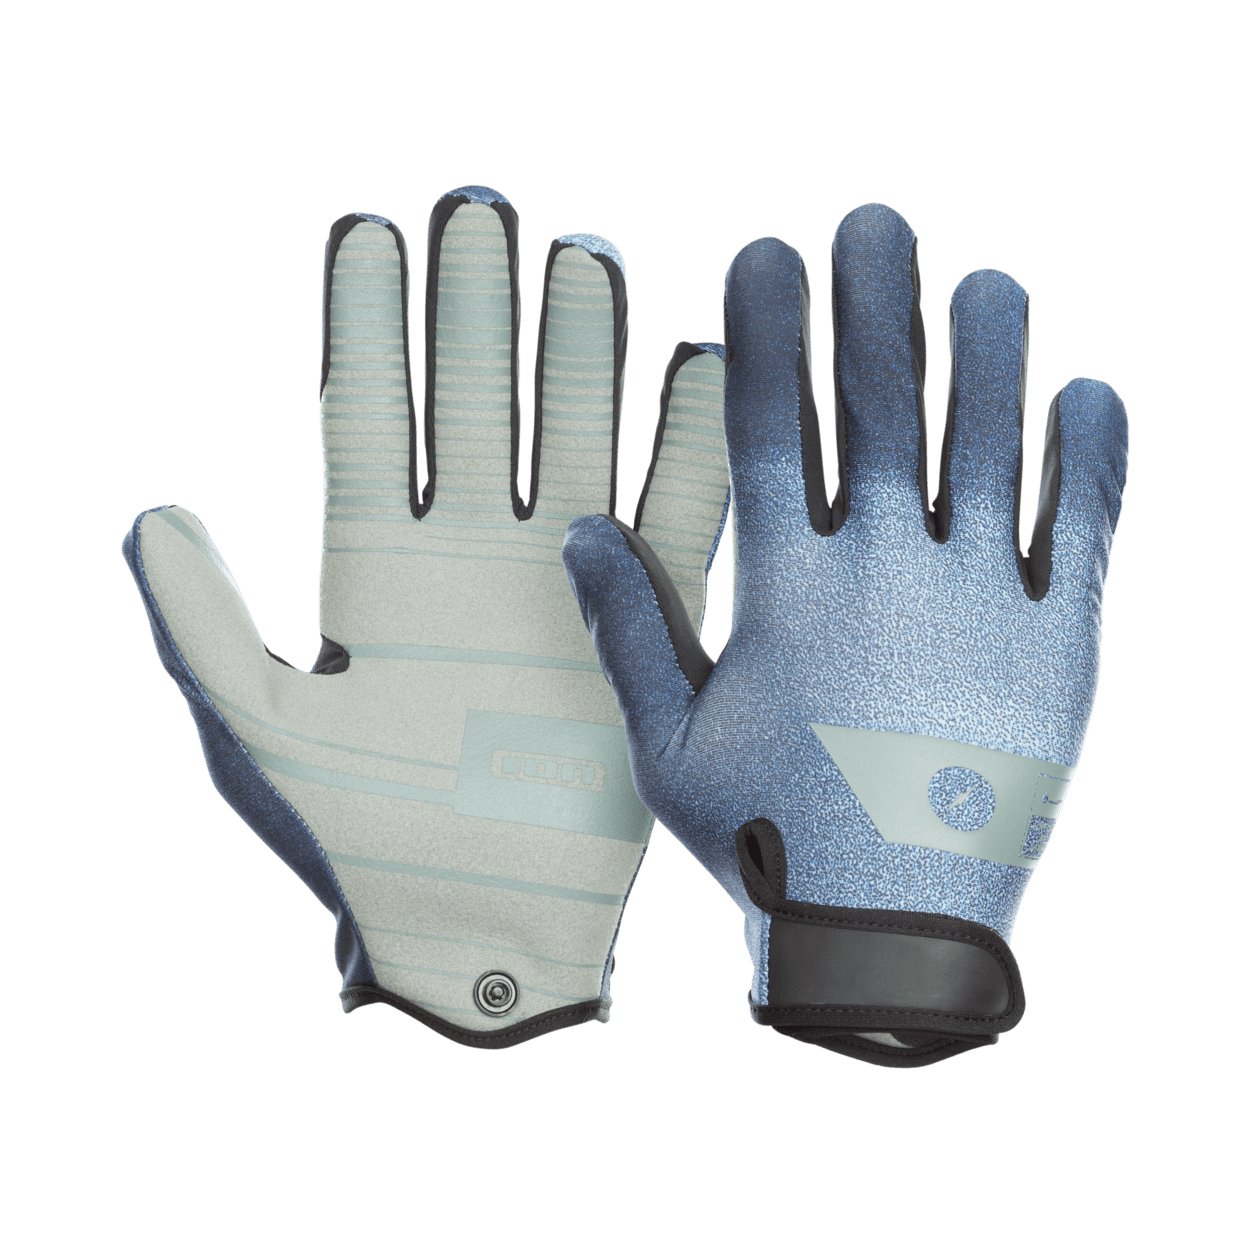 ION Amara Gloves Full Finger 2022 - Worthing Watersports - 9008415883363 - Neo Accessories - ION Water